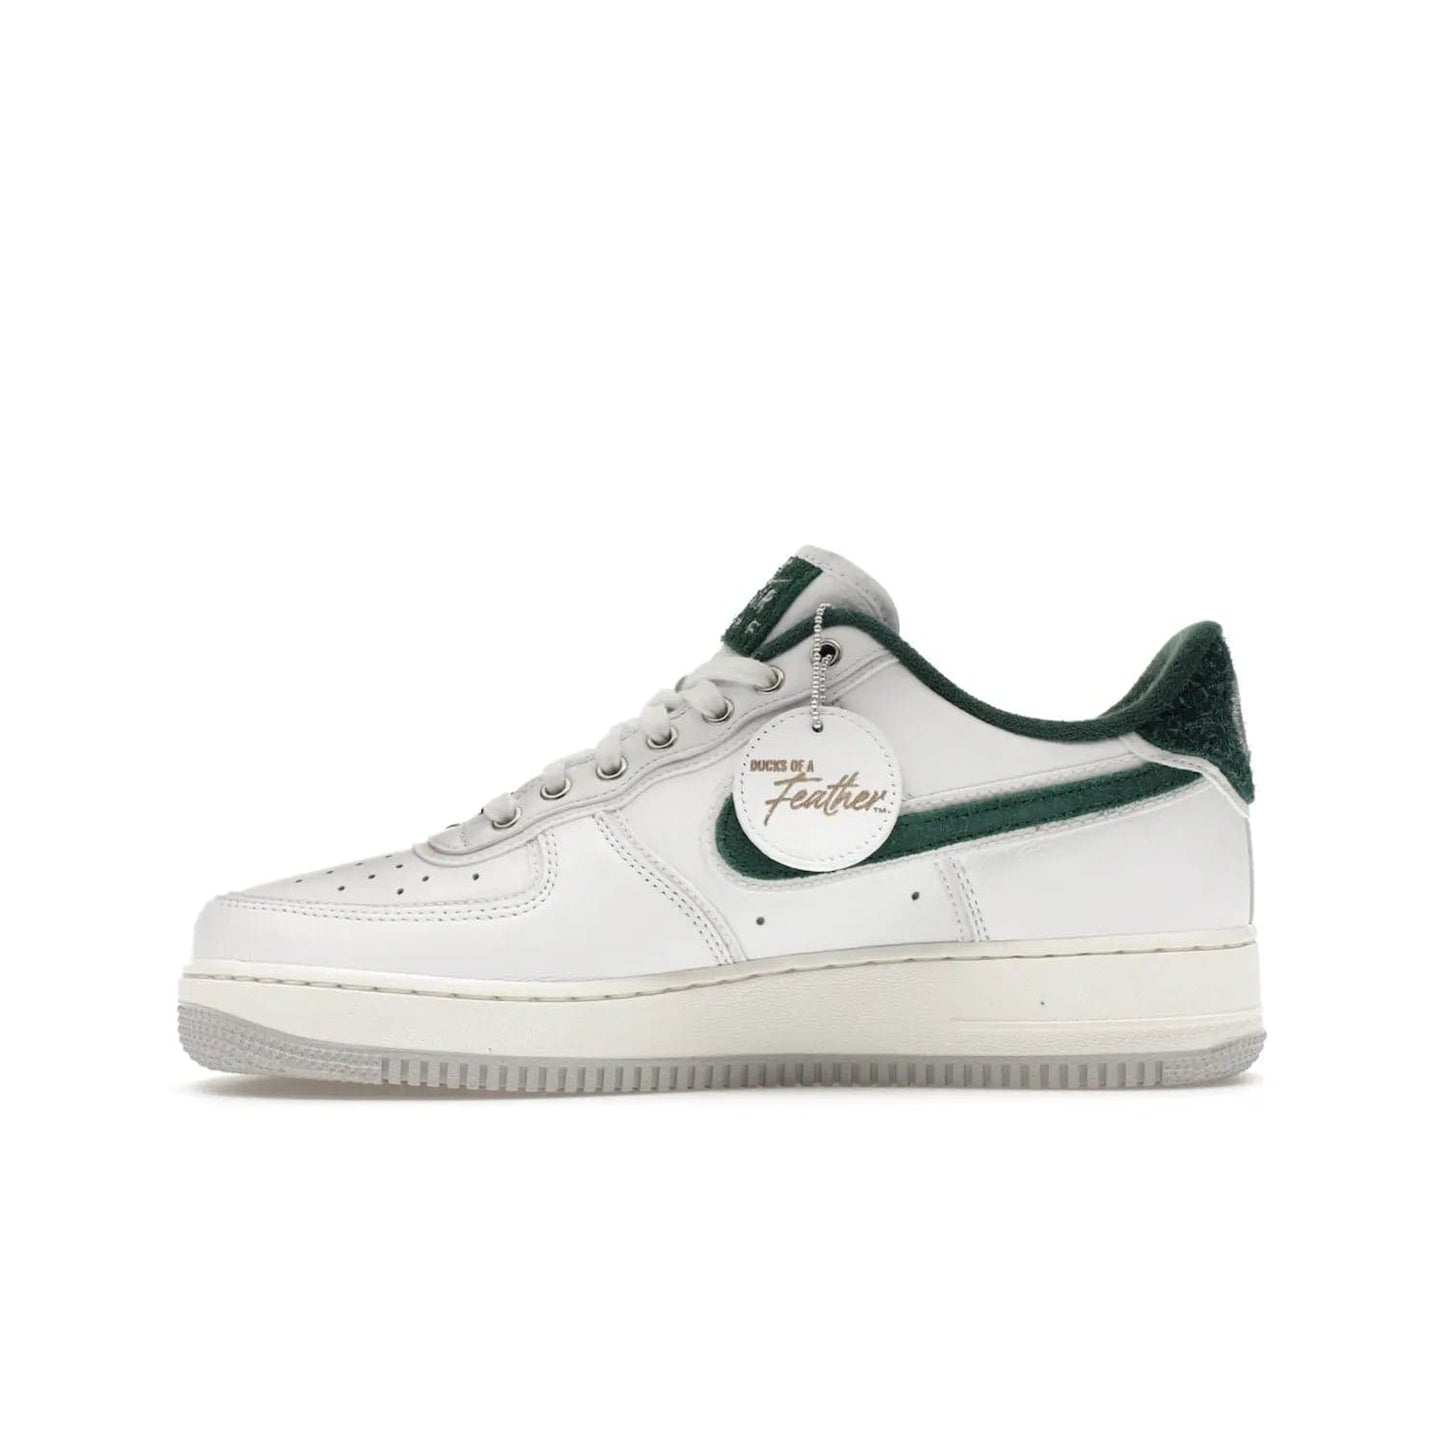 Nike Air Force 1 Low '07 Premium University of Oregon PE - Image 19 - Only at www.BallersClubKickz.com - The Nike Air Force 1 Low '07 Premium. Special Oregon University colorway. White base with green and sail accents. Cushioned rubber midsole. Comfort and style. Support your school!